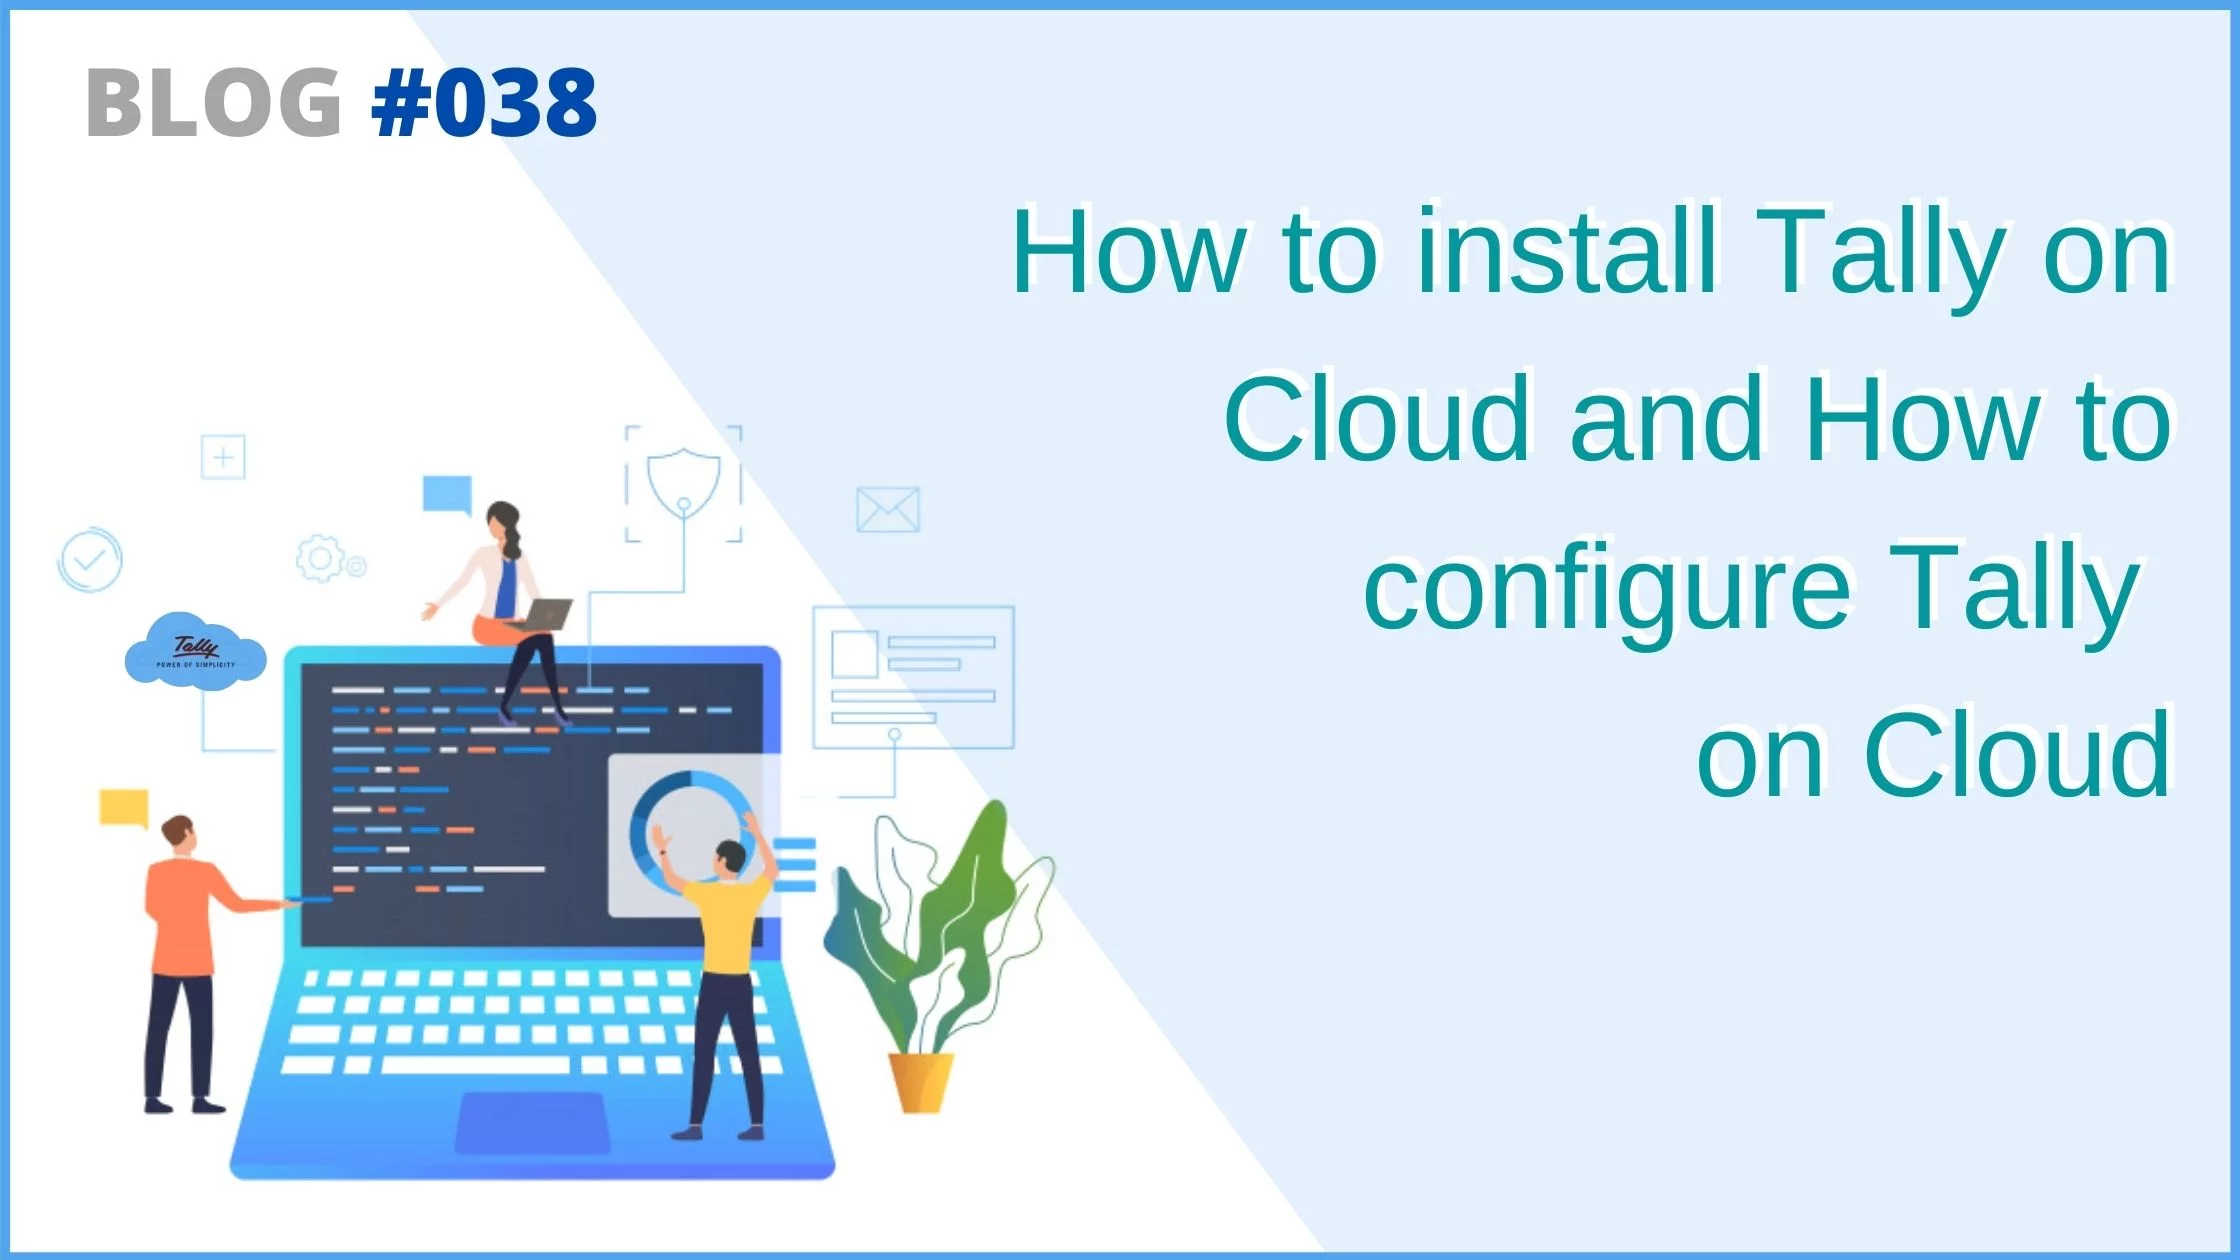 Tally on cloud configuration and installation on Cloud